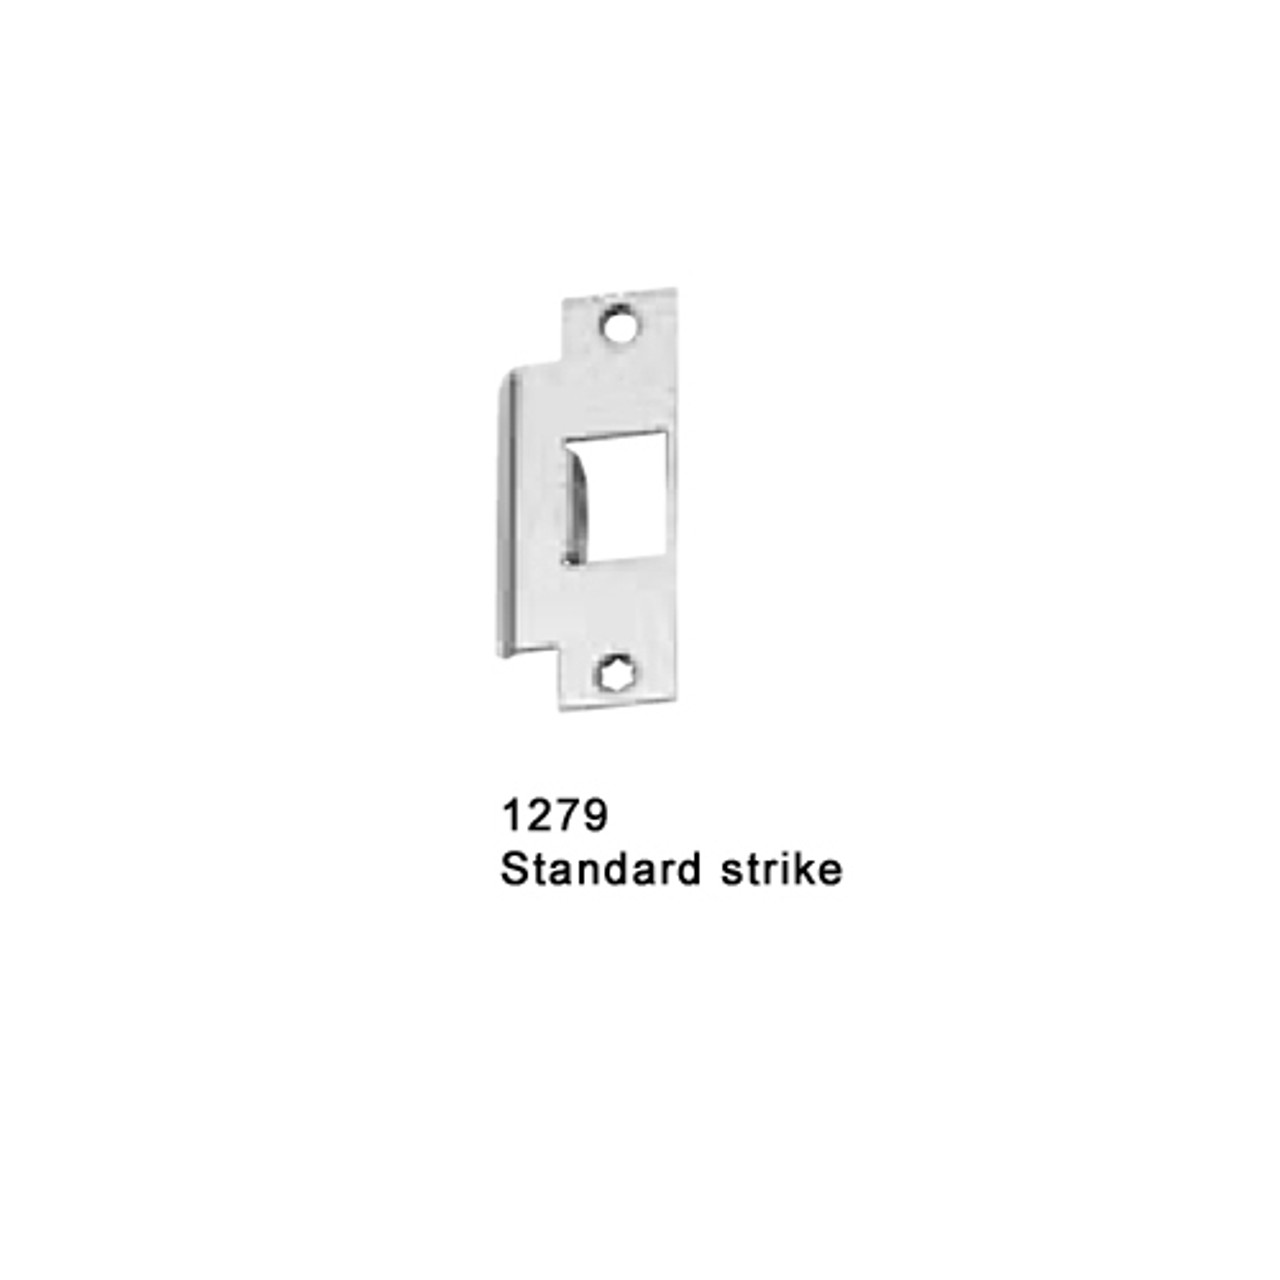 F-25-M-EO-US32-4-RHR Falcon 25 Series Fire Rated Exit Only Mortise Lock Devices in Polished Stainless Steel